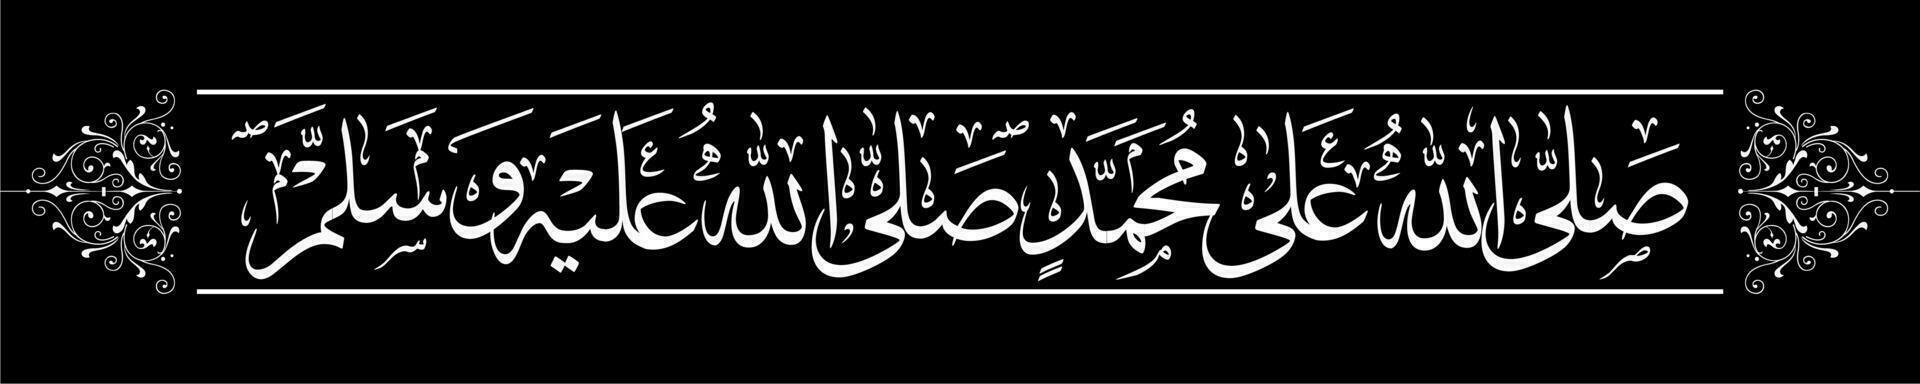 Arabic calligraphy, translation mercy upon the Prophet Muhammad and mercy and salvation upon the Prophet vector